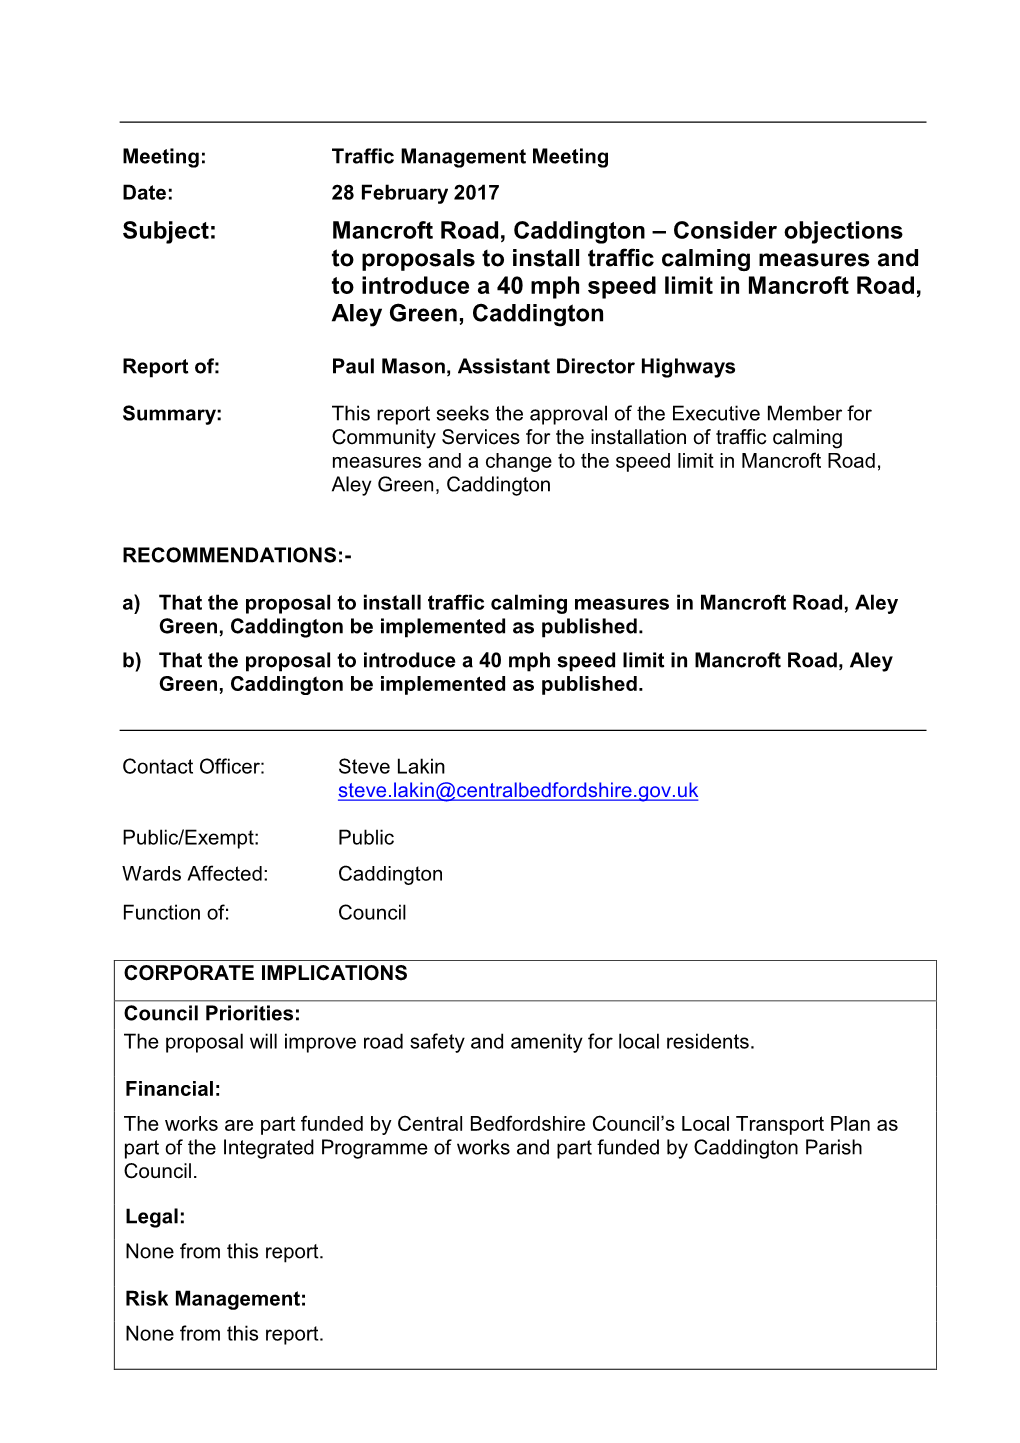 Subject: Mancroft Road, Caddington – Consider Objections to Proposals to Install Traffic Calming Measures and to Introduce